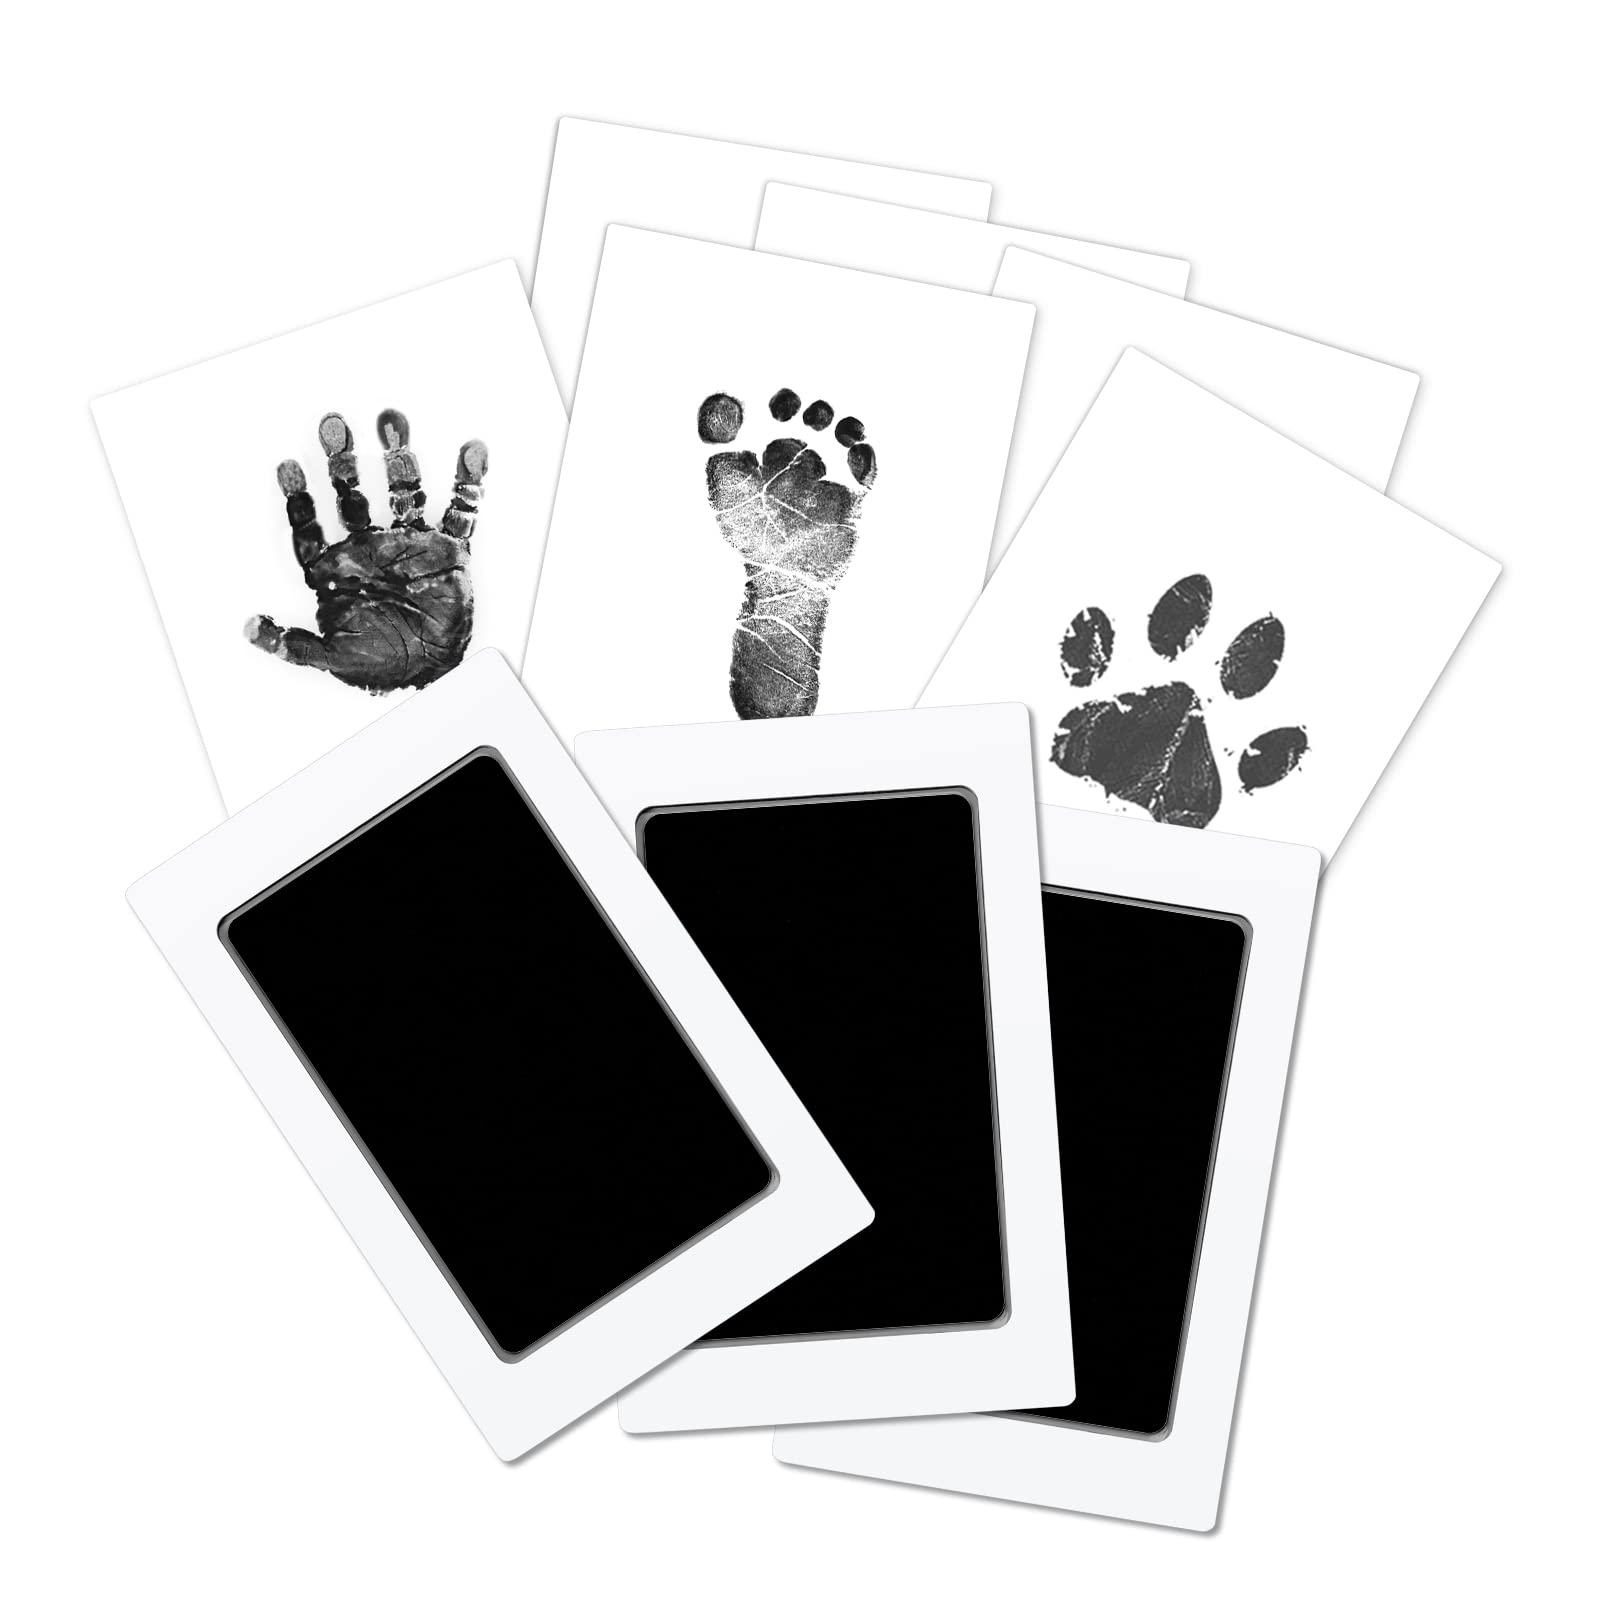  Xingwenice Clean Touch Ink Pad Baby Handprint Footprint Kit -  Inkless Infant Hand and Foot Stamp - Pet Paw Print Kit, Safe for Newborn -  Perfect Family Memory or Gift (